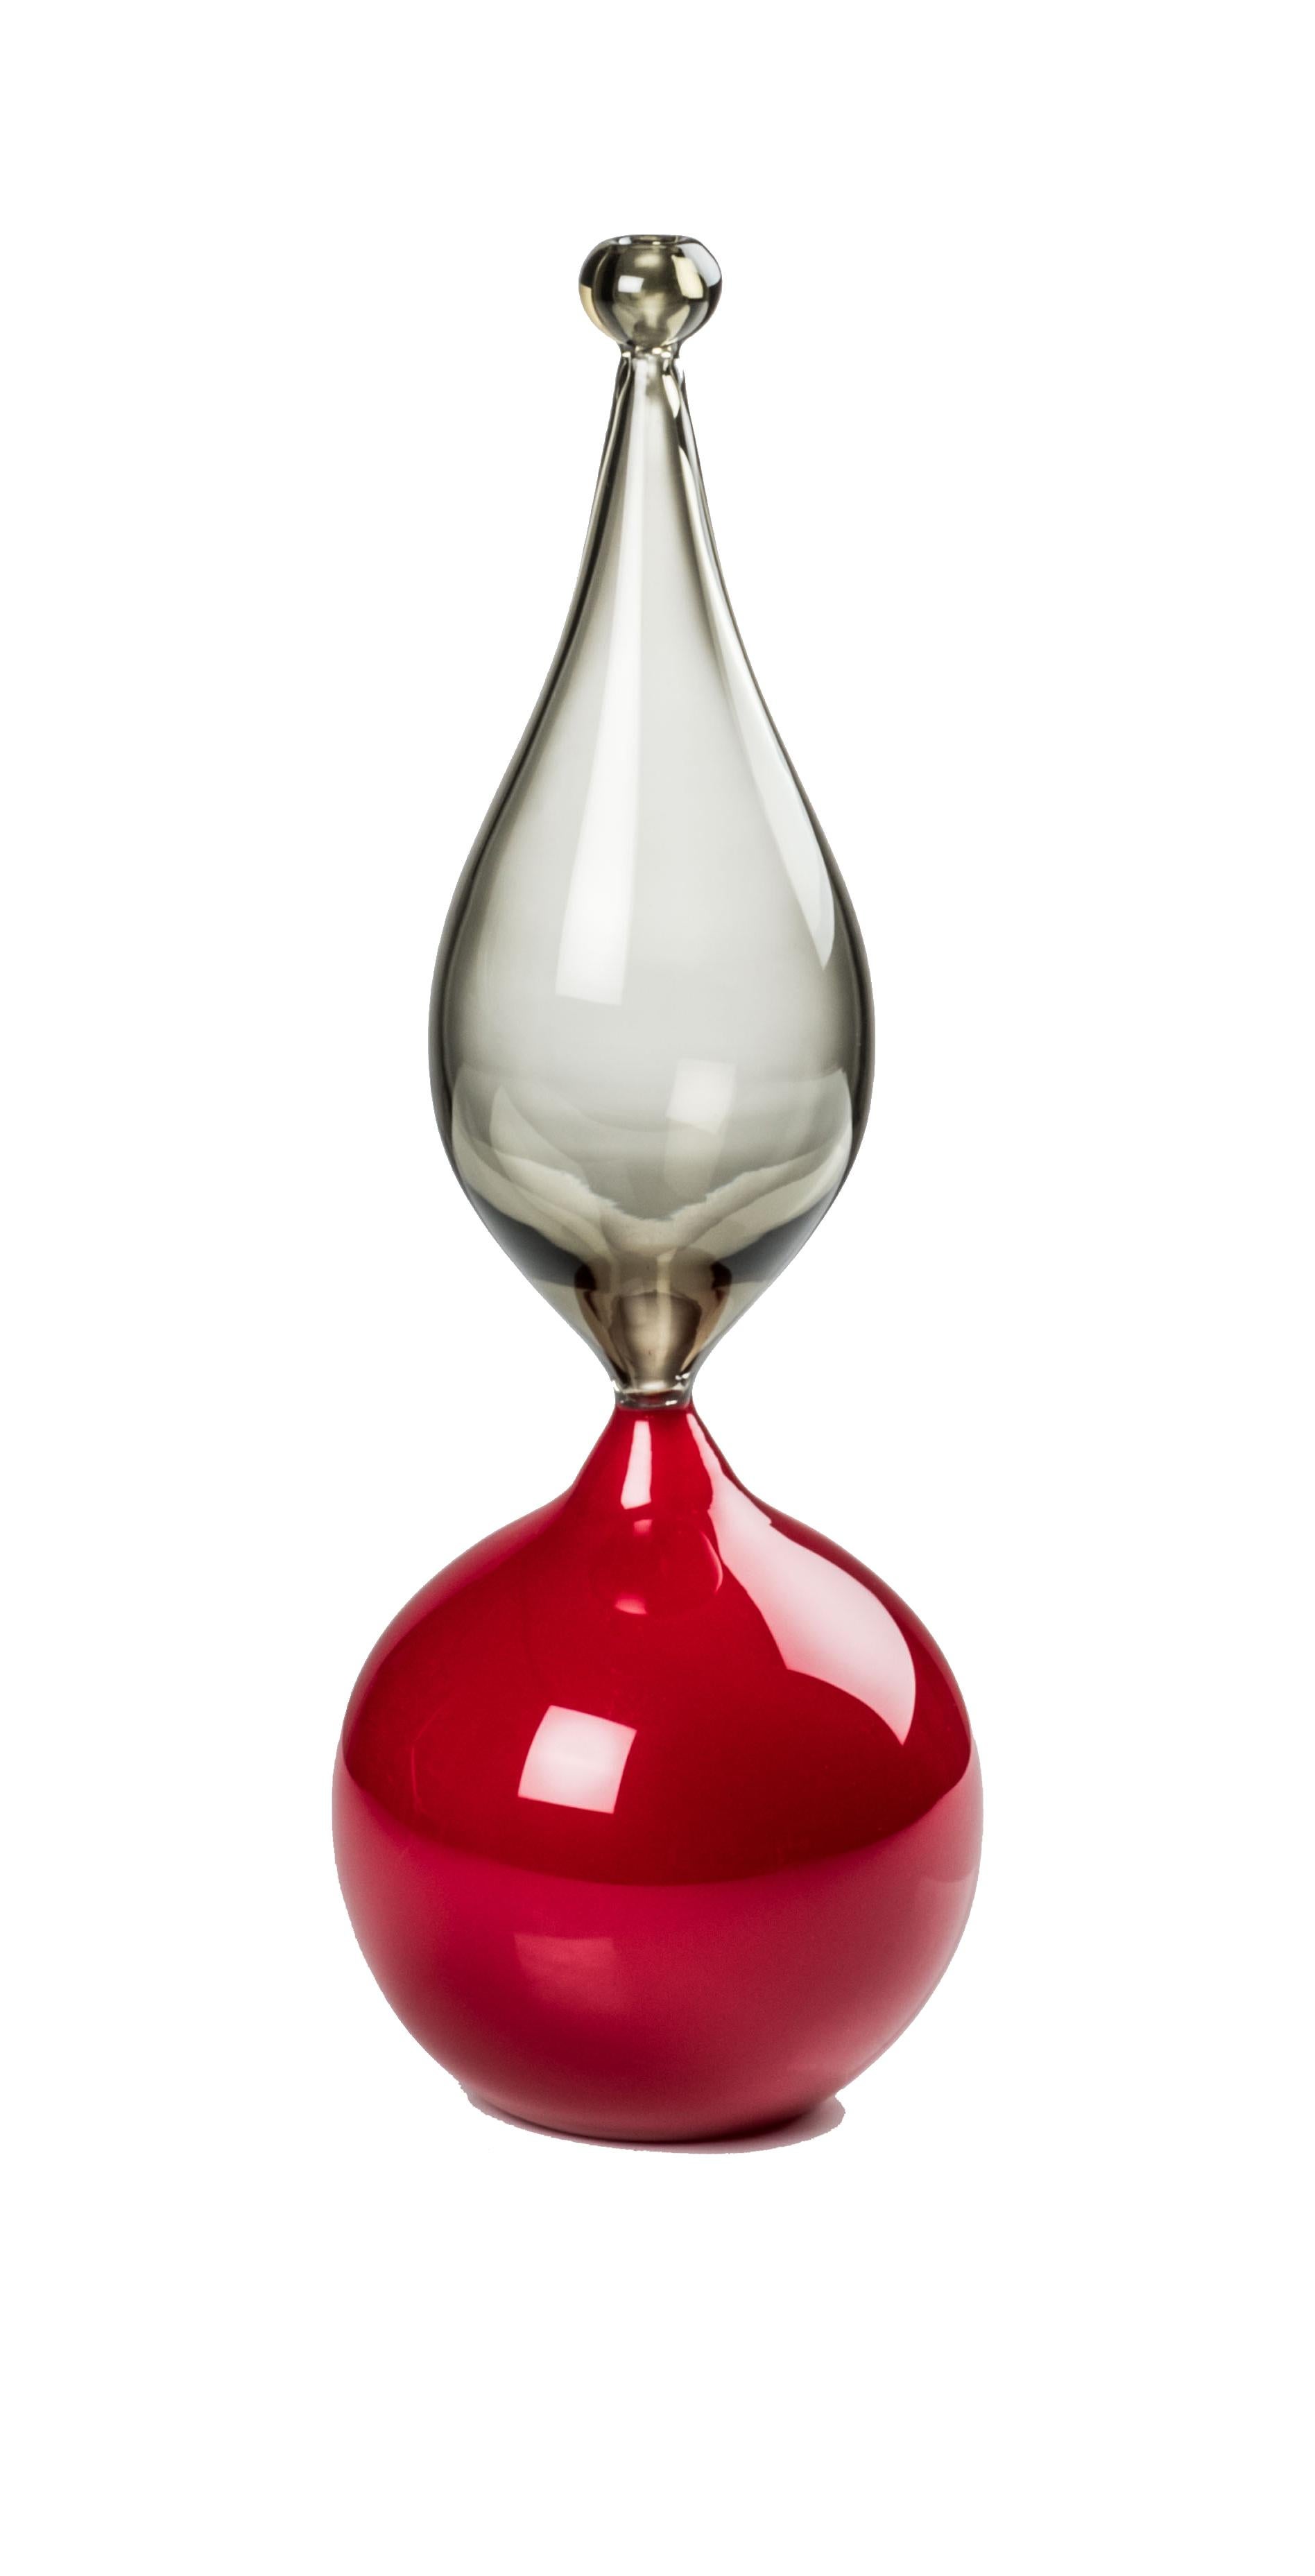 Venini glass vase with red cylindrical base, slim shaped body, and spherical head. Featured in red and grey colored glass and designed by Monica Giggisberg & Philip Baldwin in 2018. Perfect for indoor home decor as a strong statement piece for any